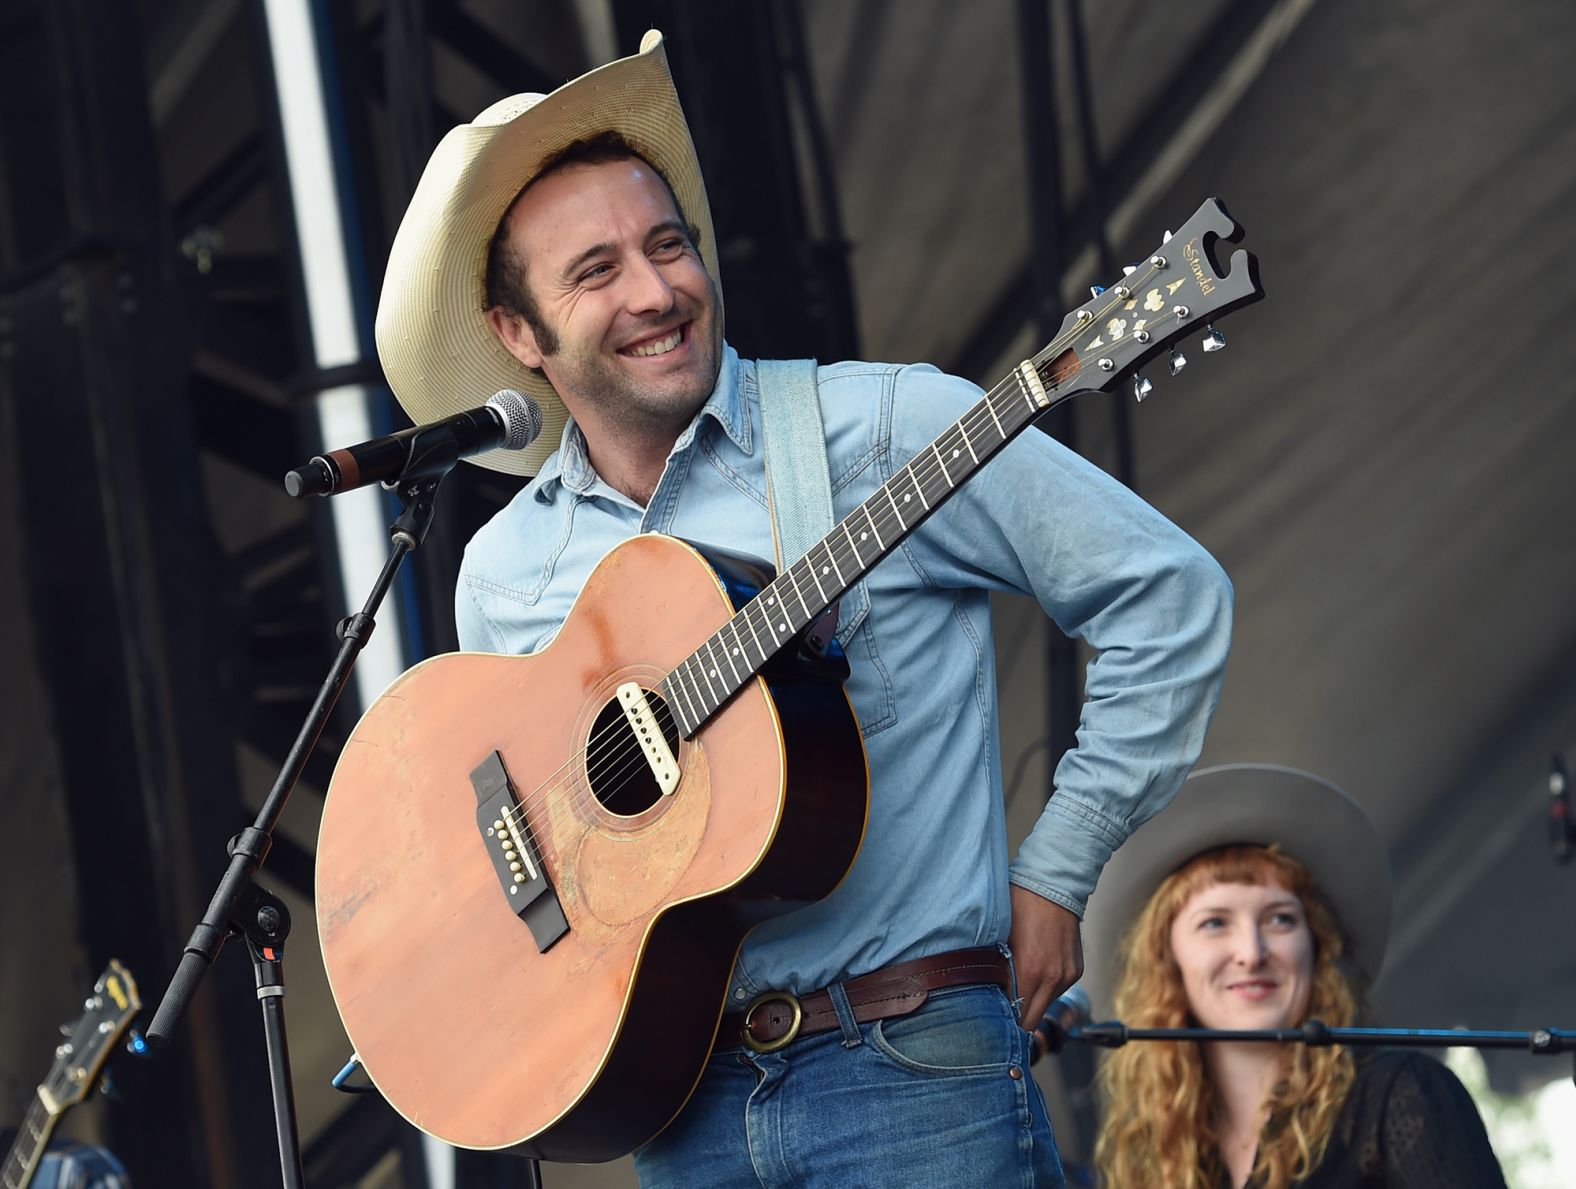 Country musician Luke Bell, who went missing in August, <a href="index.php?page=&url=https%3A%2F%2Fwww.cnn.com%2F2022%2F08%2F31%2Fentertainment%2Fluke-bell-obit%2Findex.html" target="_blank">was found dead,</a> according to officer Frank Magos from the Tucson Police Department. Bell was 32. Magos said an investigation was ongoing.